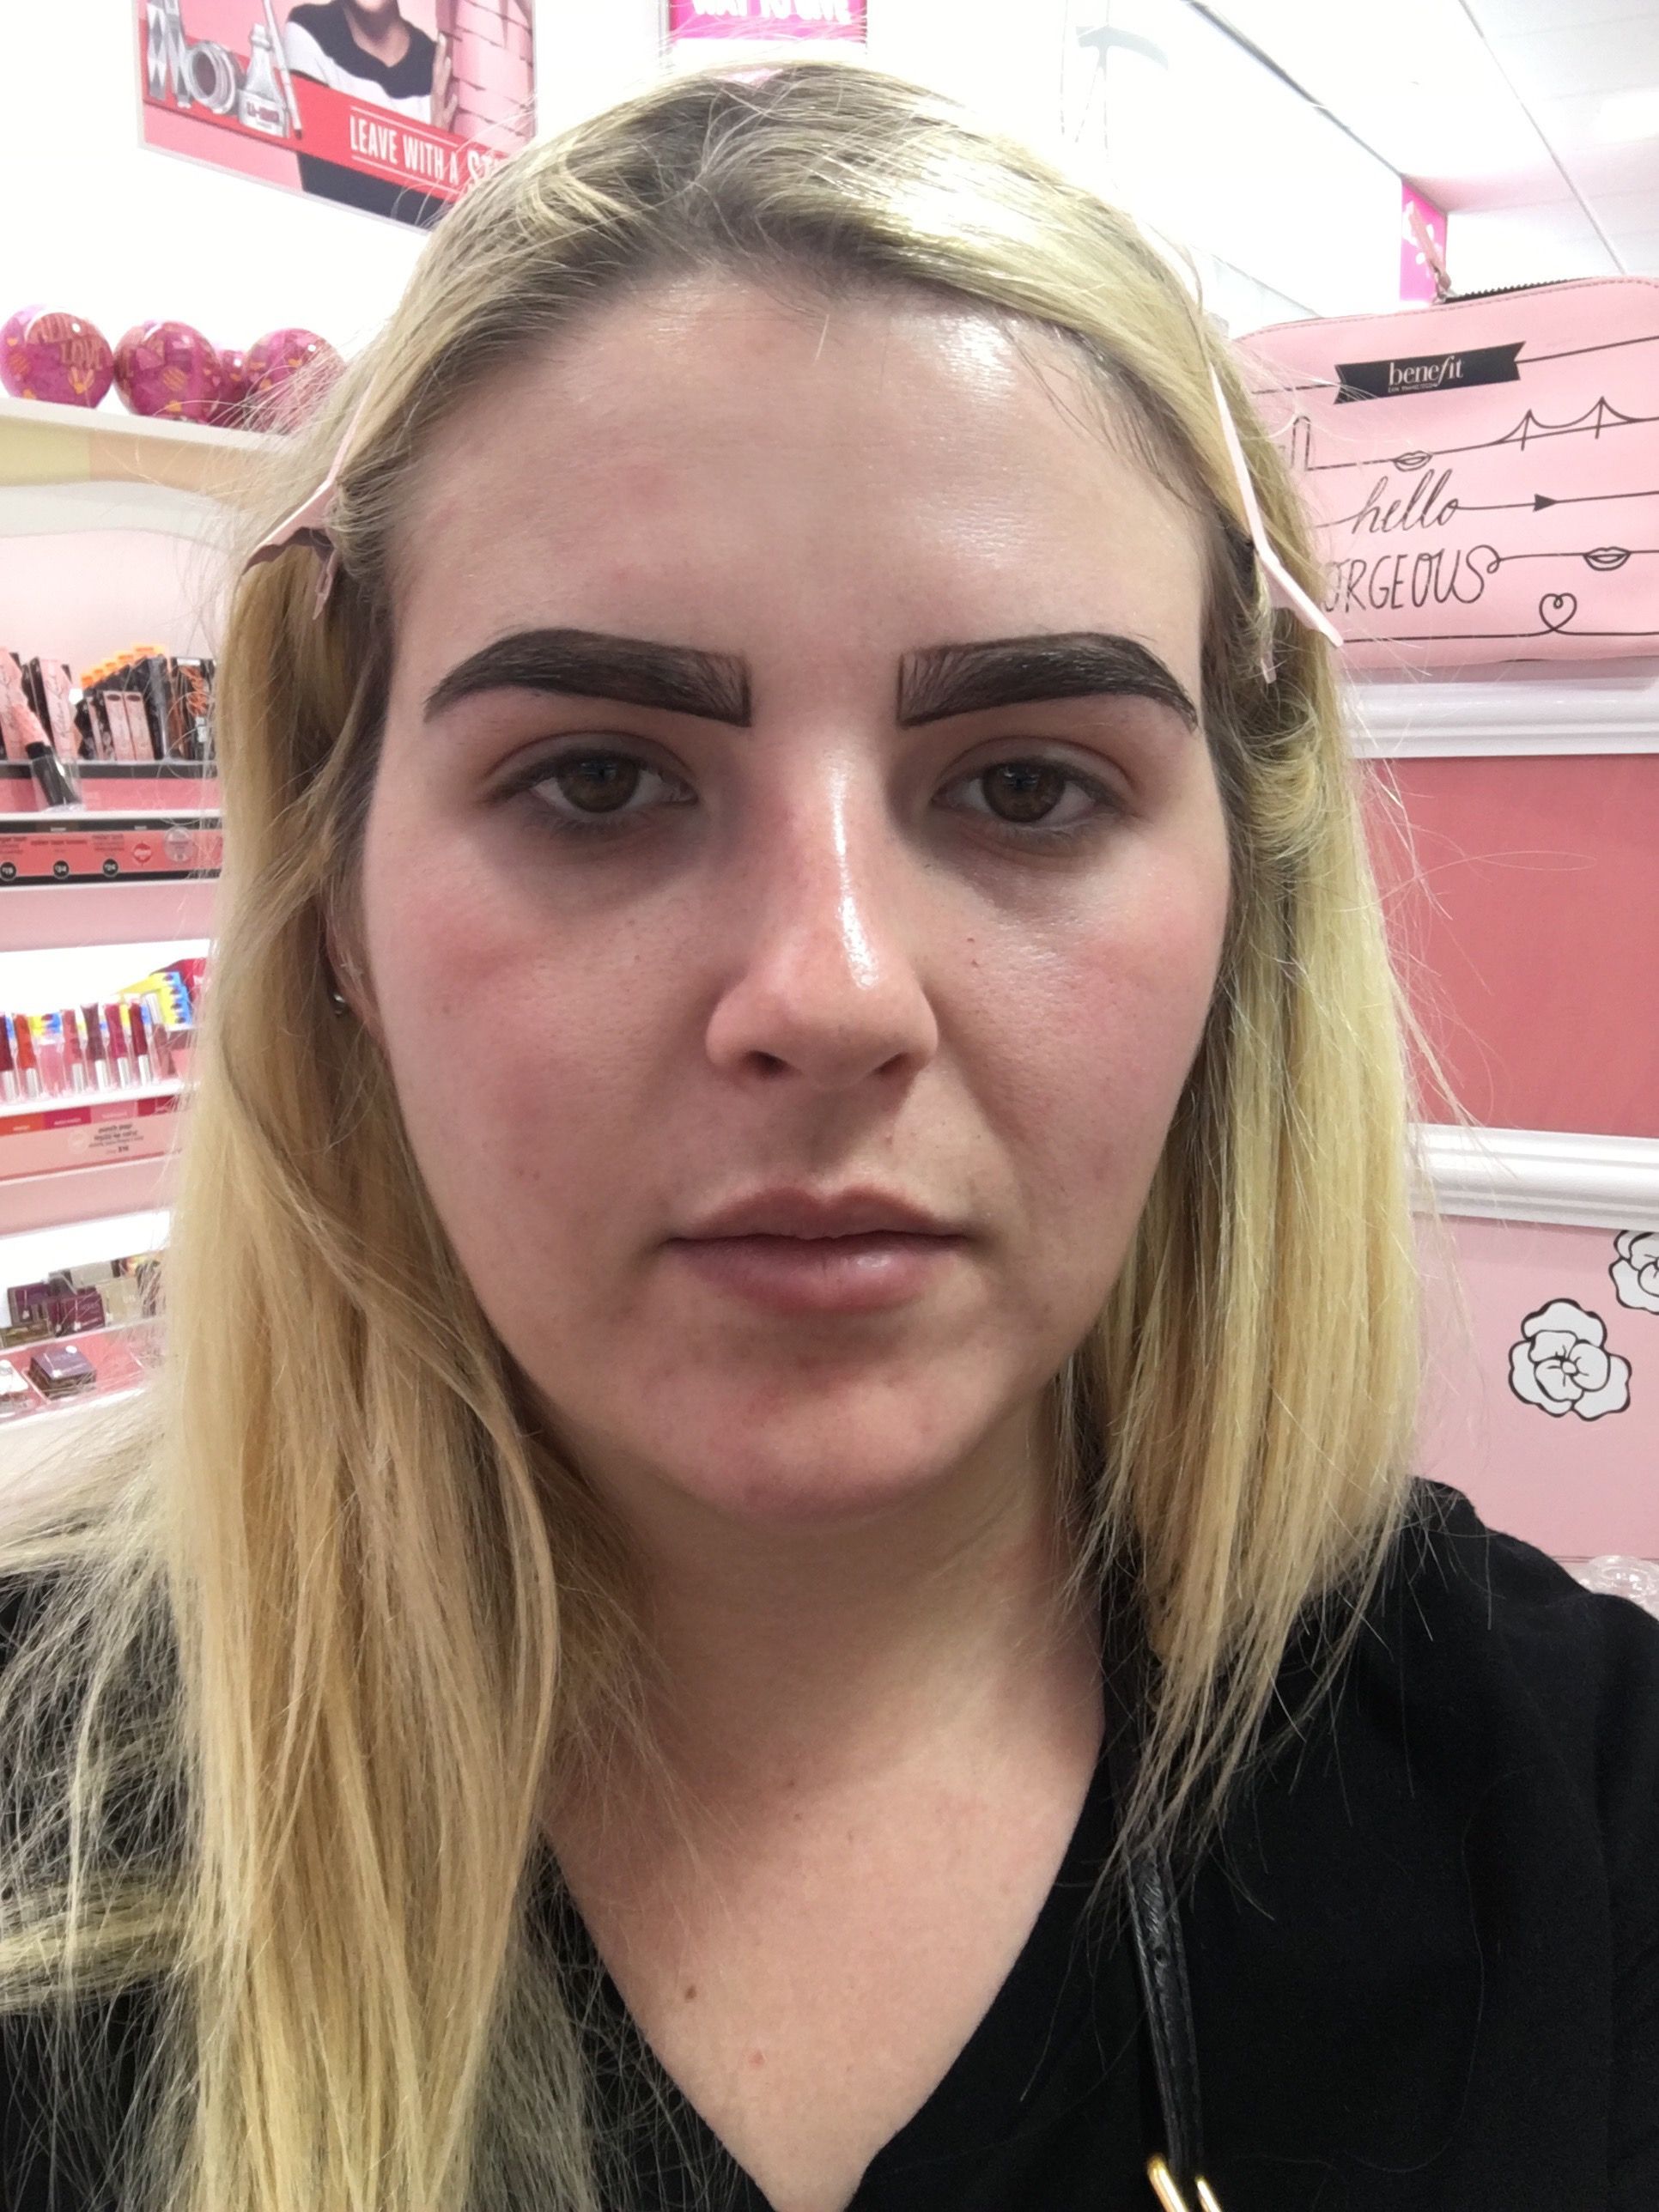 My experience at brow bar by Benefit 